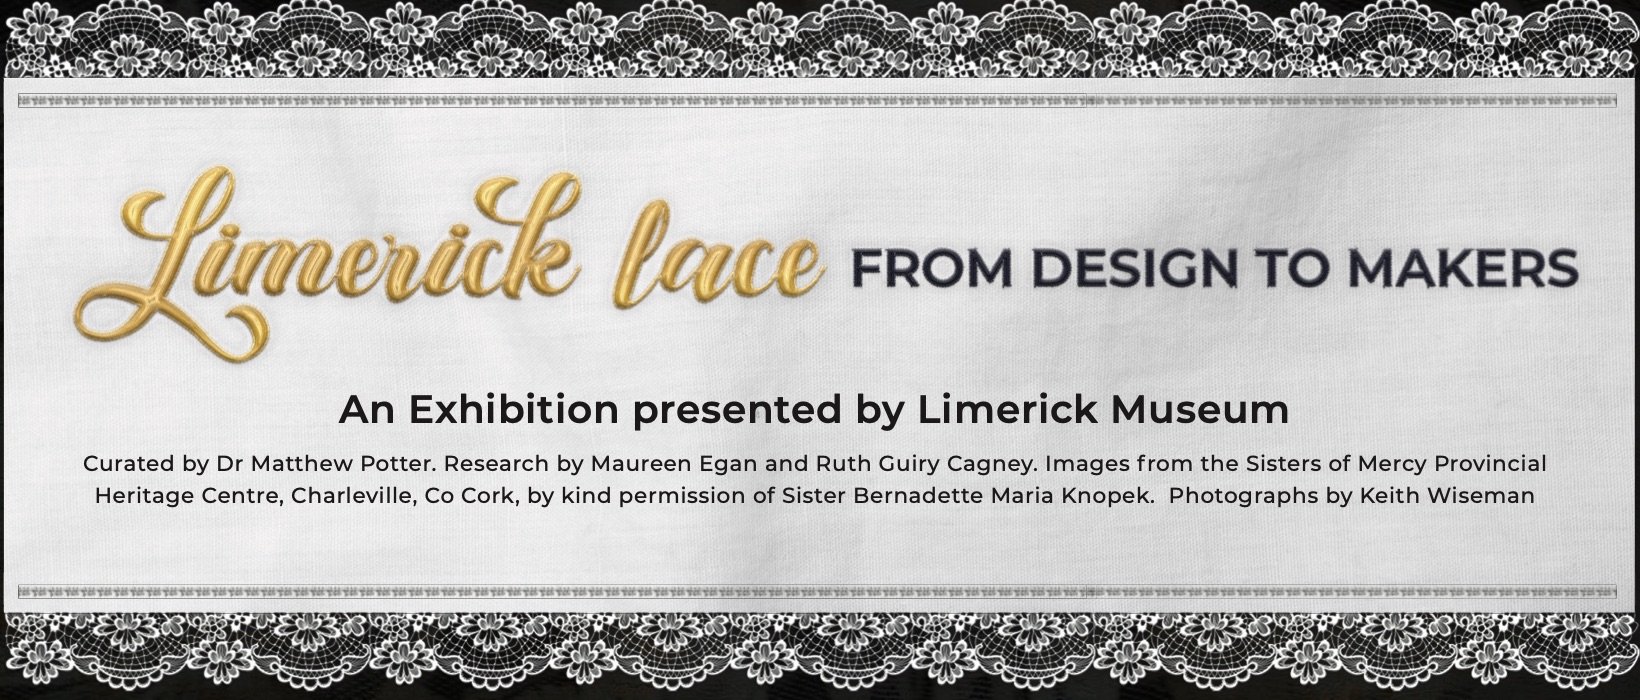 Limerick Lace – from Design to Makers Online Exhibition